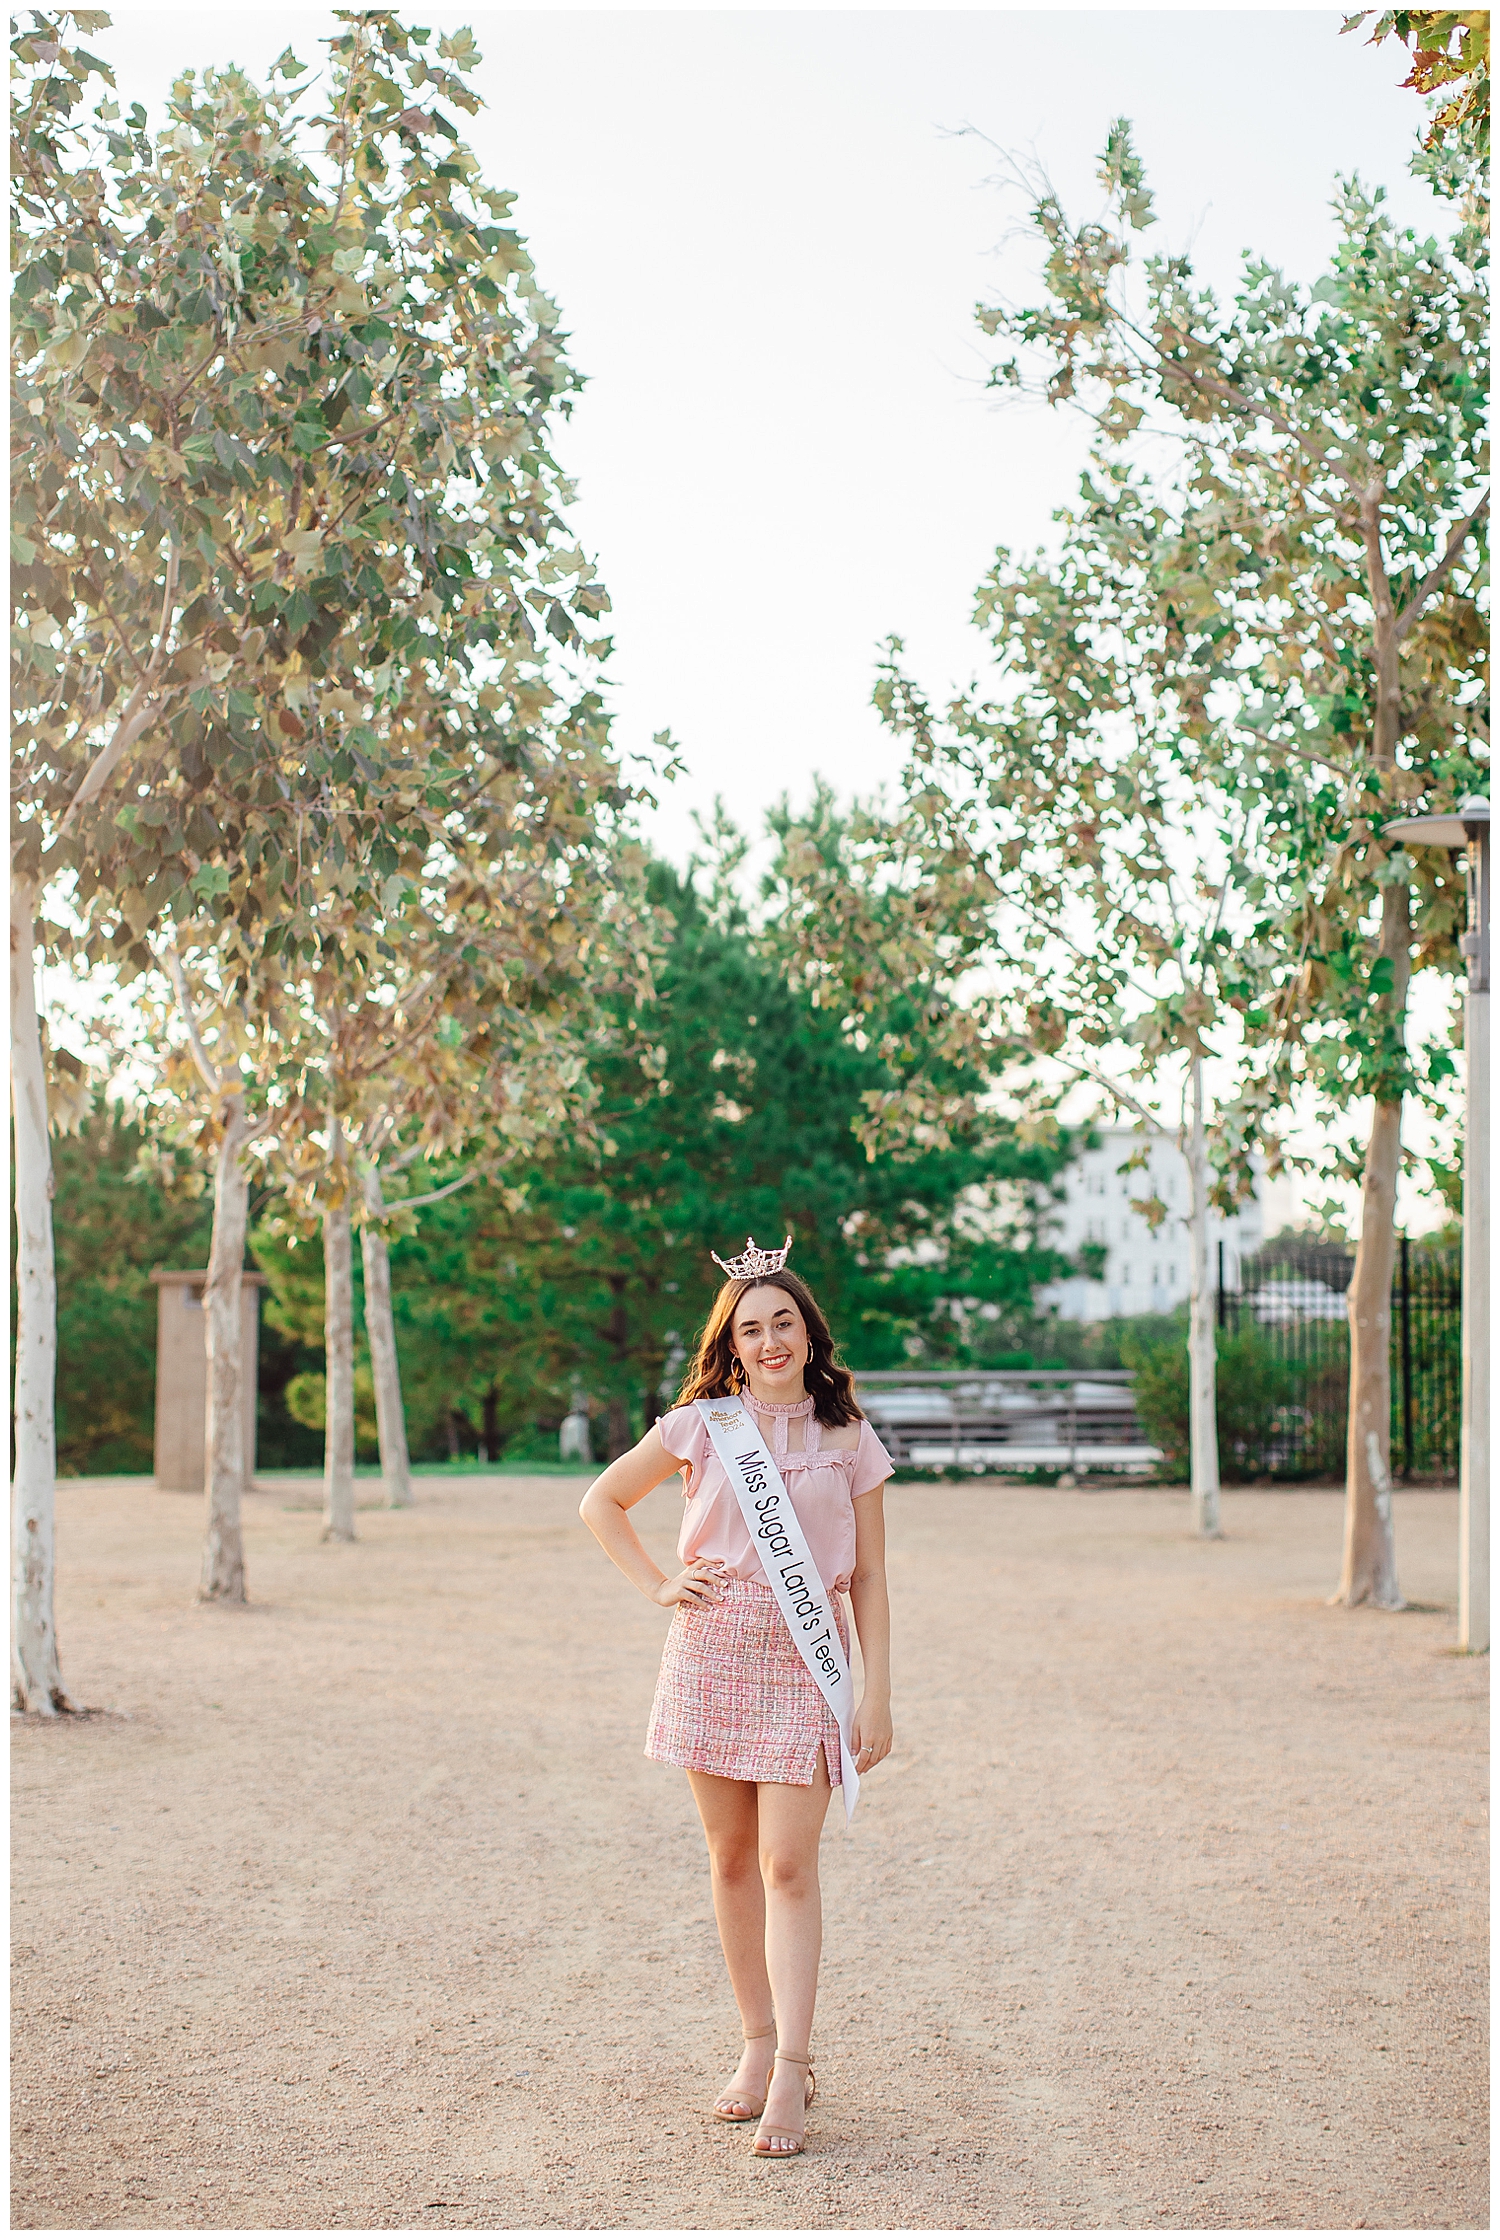 MIss Sugar Land Teen wearing crown and banner in pink skirt and shirt walking for Houston Skyline Senior Photos